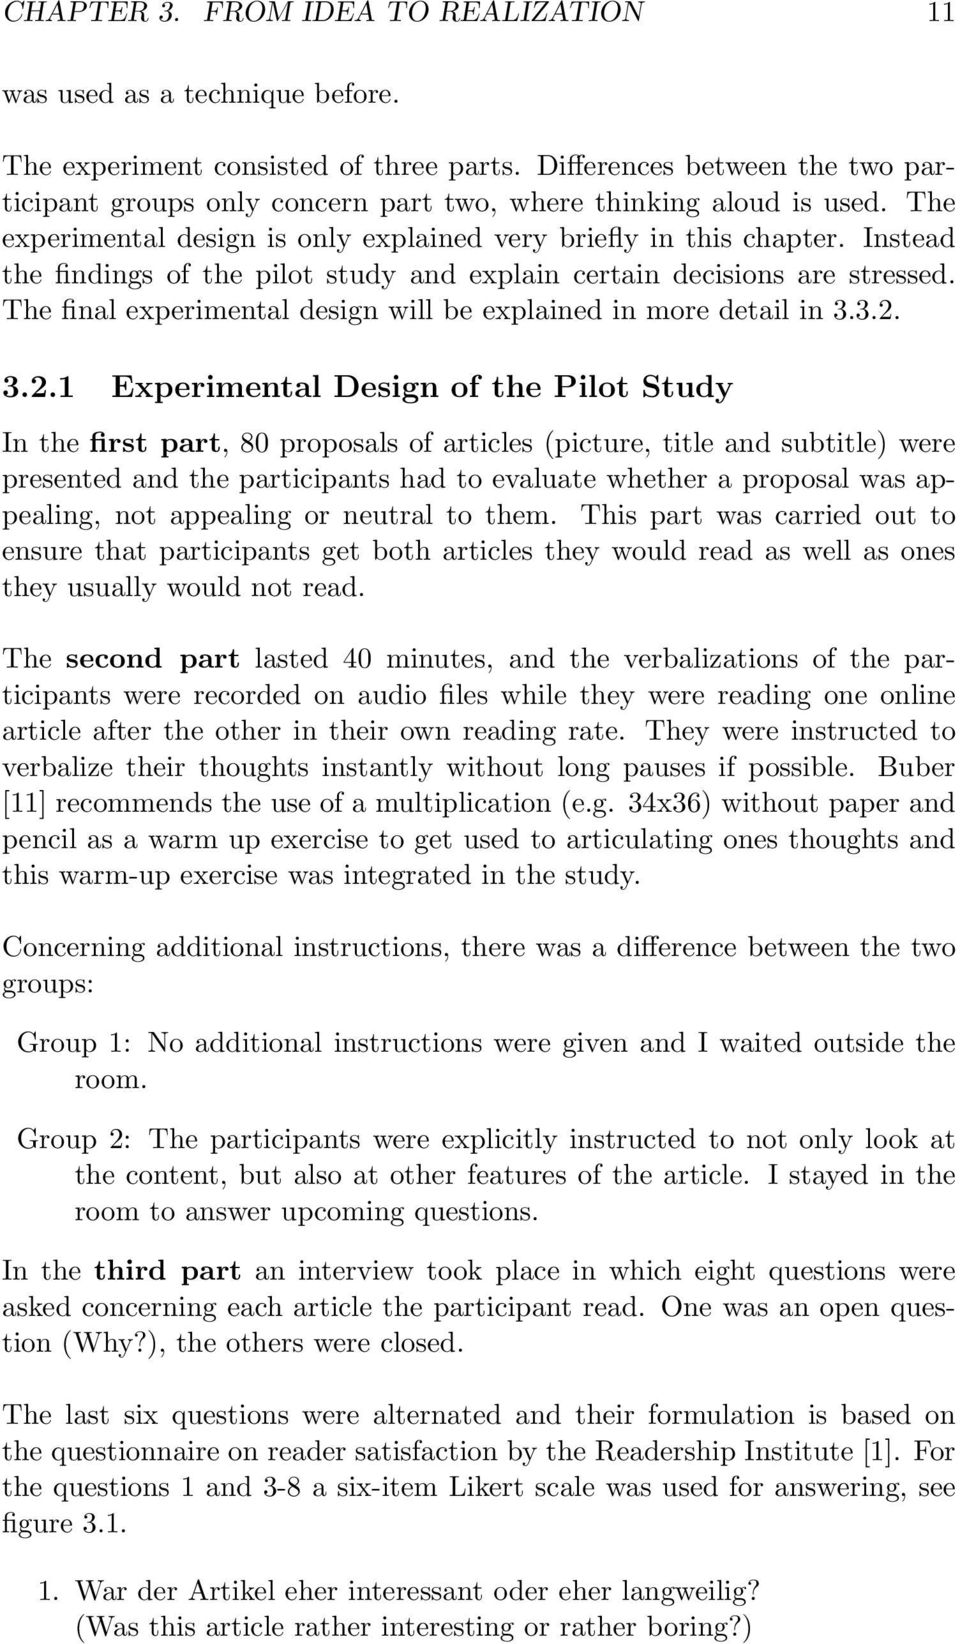 Instead the findings of the pilot study and explain certain decisions are stressed. The final experimental design will be explained in more detail in 3.3.2.